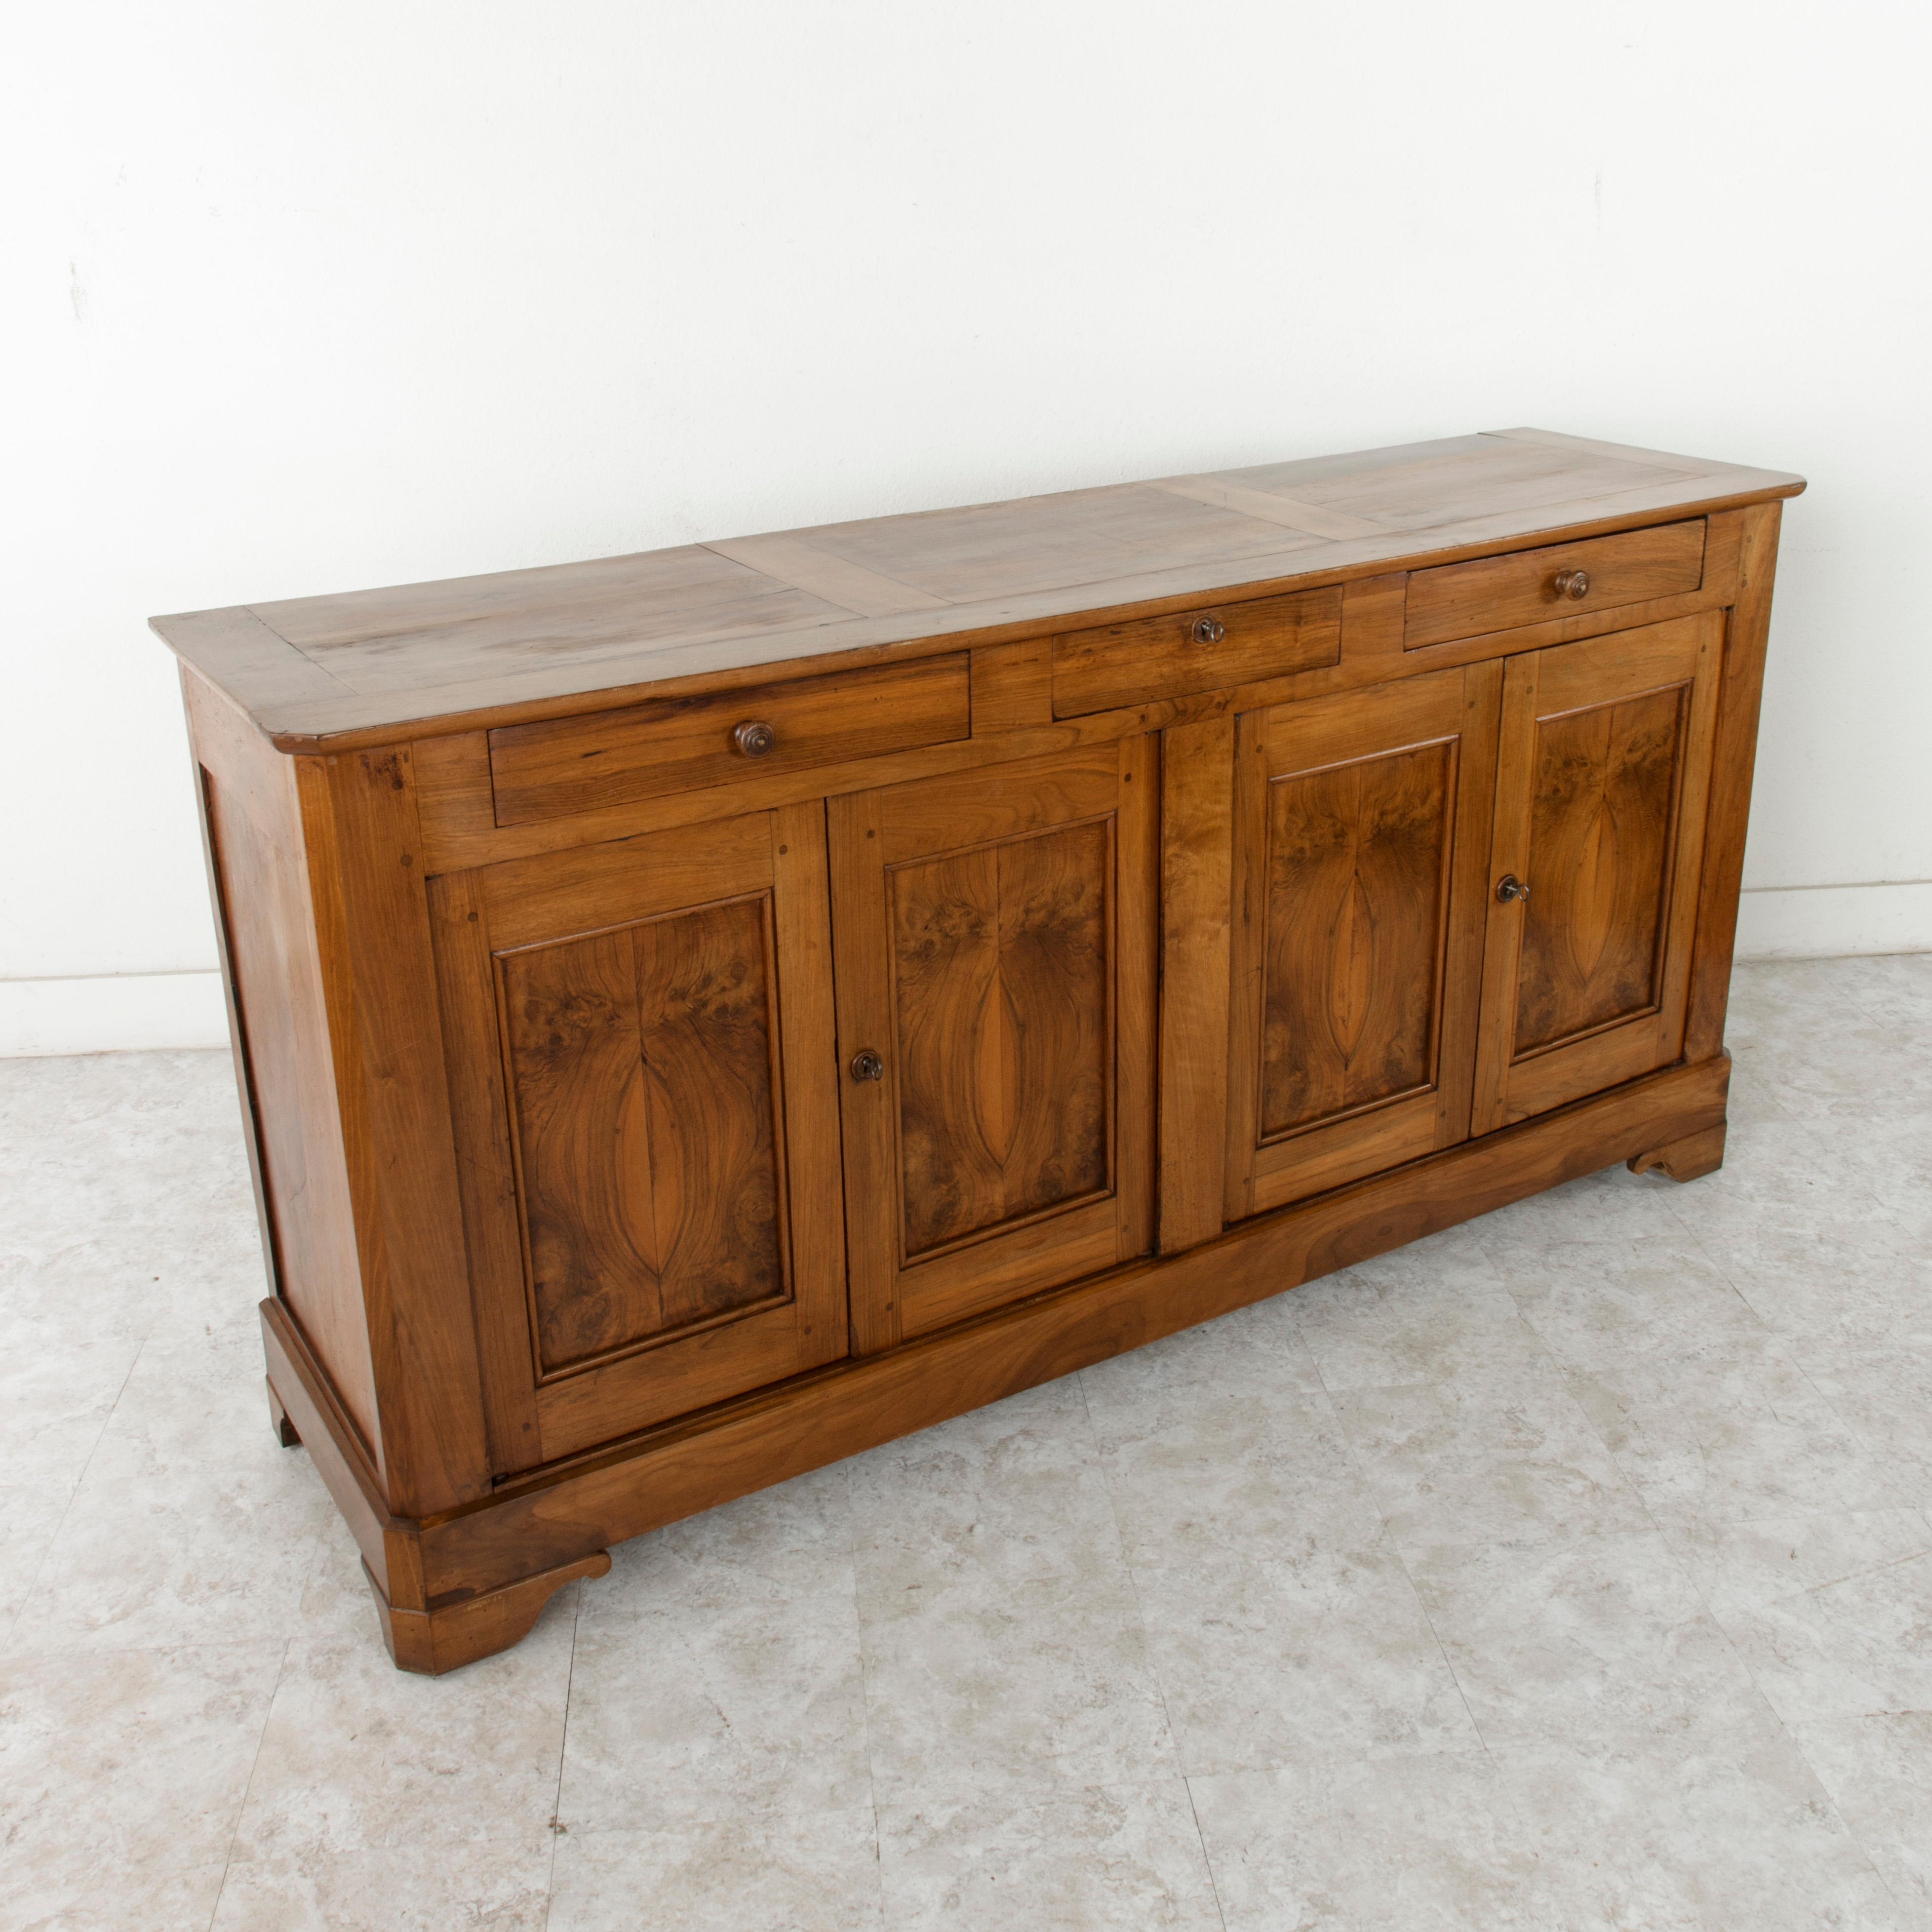 This French Louis Philippe style enfilade or sideboard from the late 19th century is constructed of solid walnut with hand pegged joinery. This server features four doors of bookmatched solid walnut panels that conceal two compartments, each with a